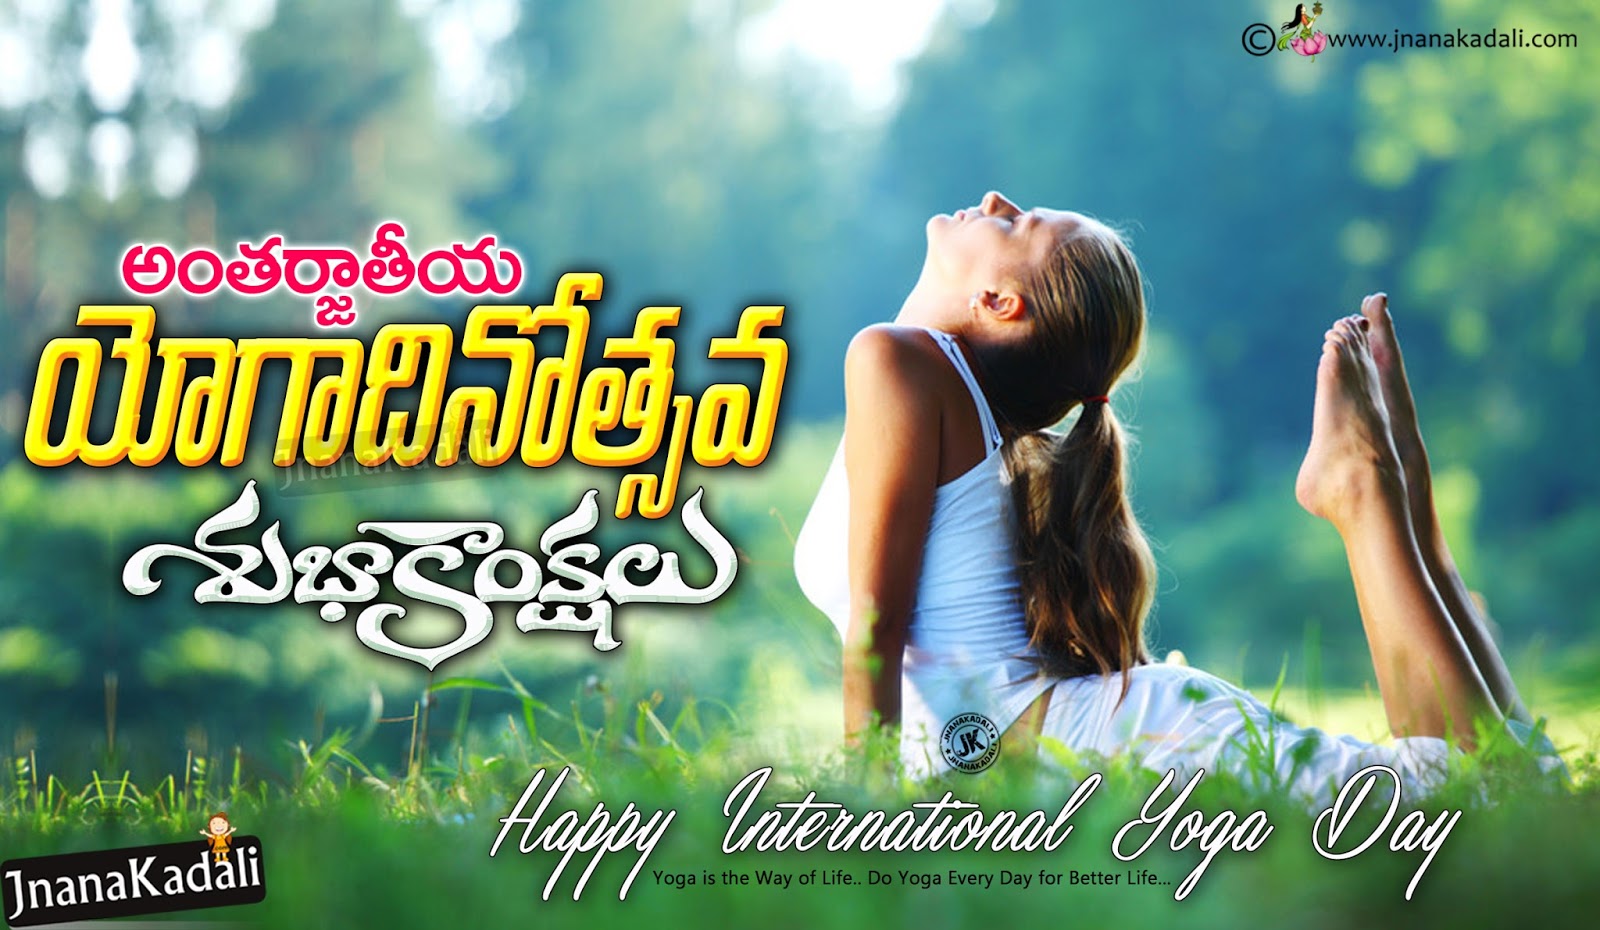 International Yoga Day Greetings With Hd Wallpapers, - Poster - HD Wallpaper 